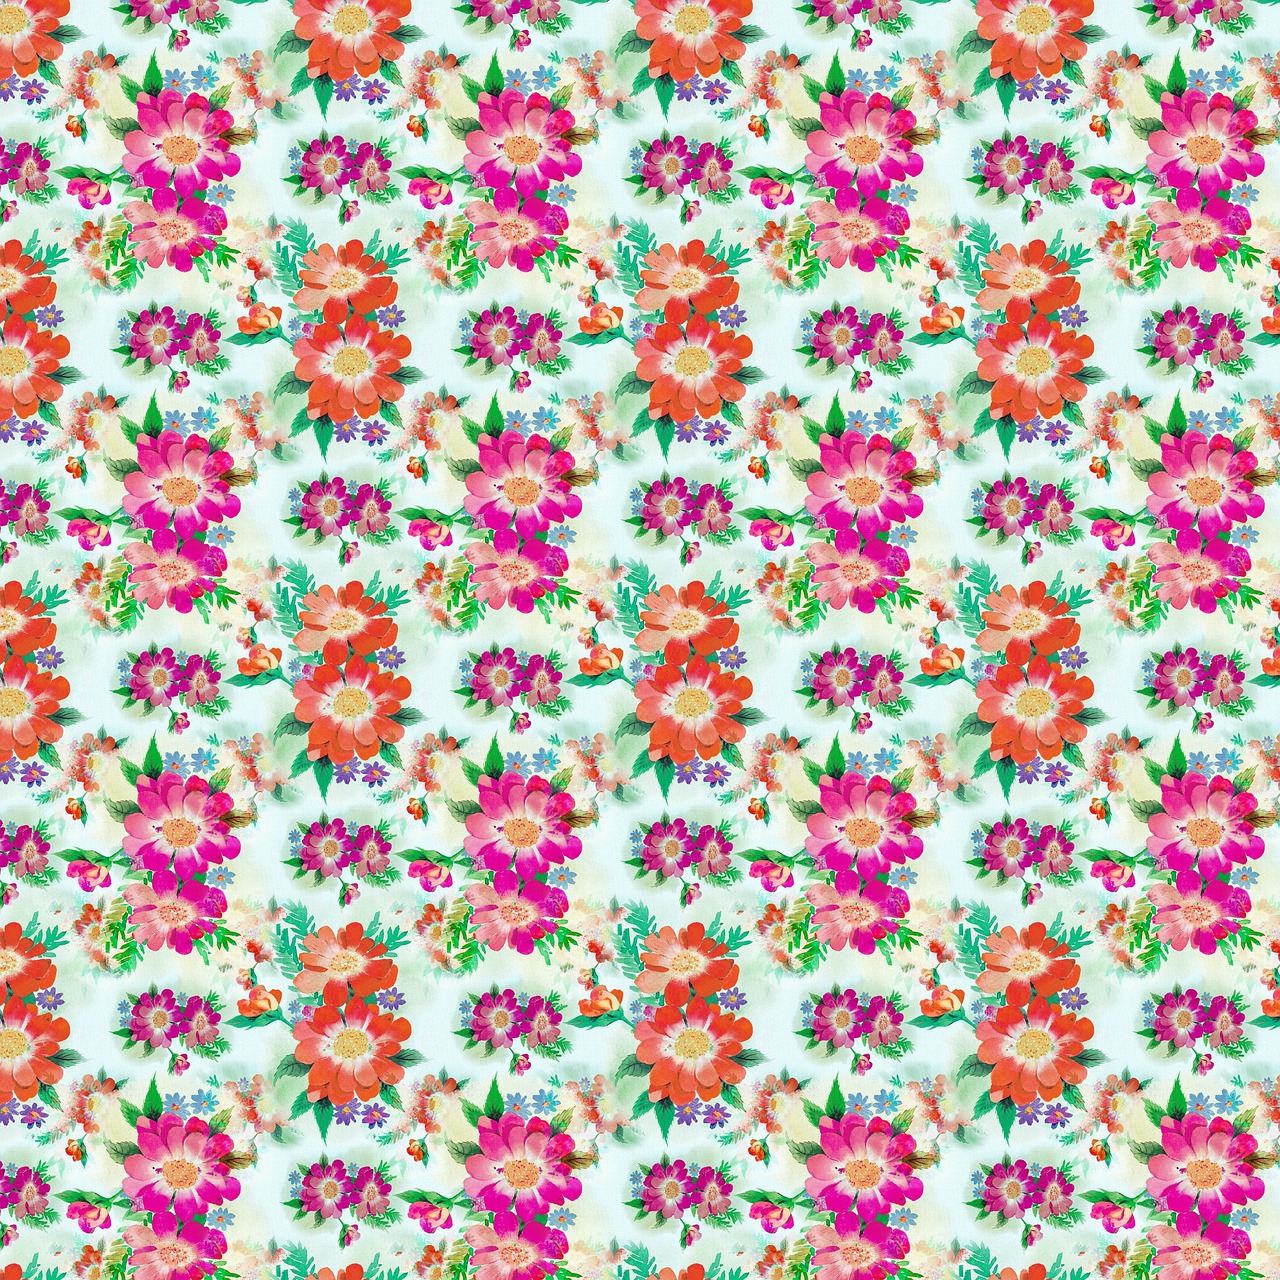 a pattern of colorful flowers on a white background, inspired by Marie Bashkirtseff, shutterstock, maximalism, pink and teal and orange, stereogram, floral clothes ”, colorful”